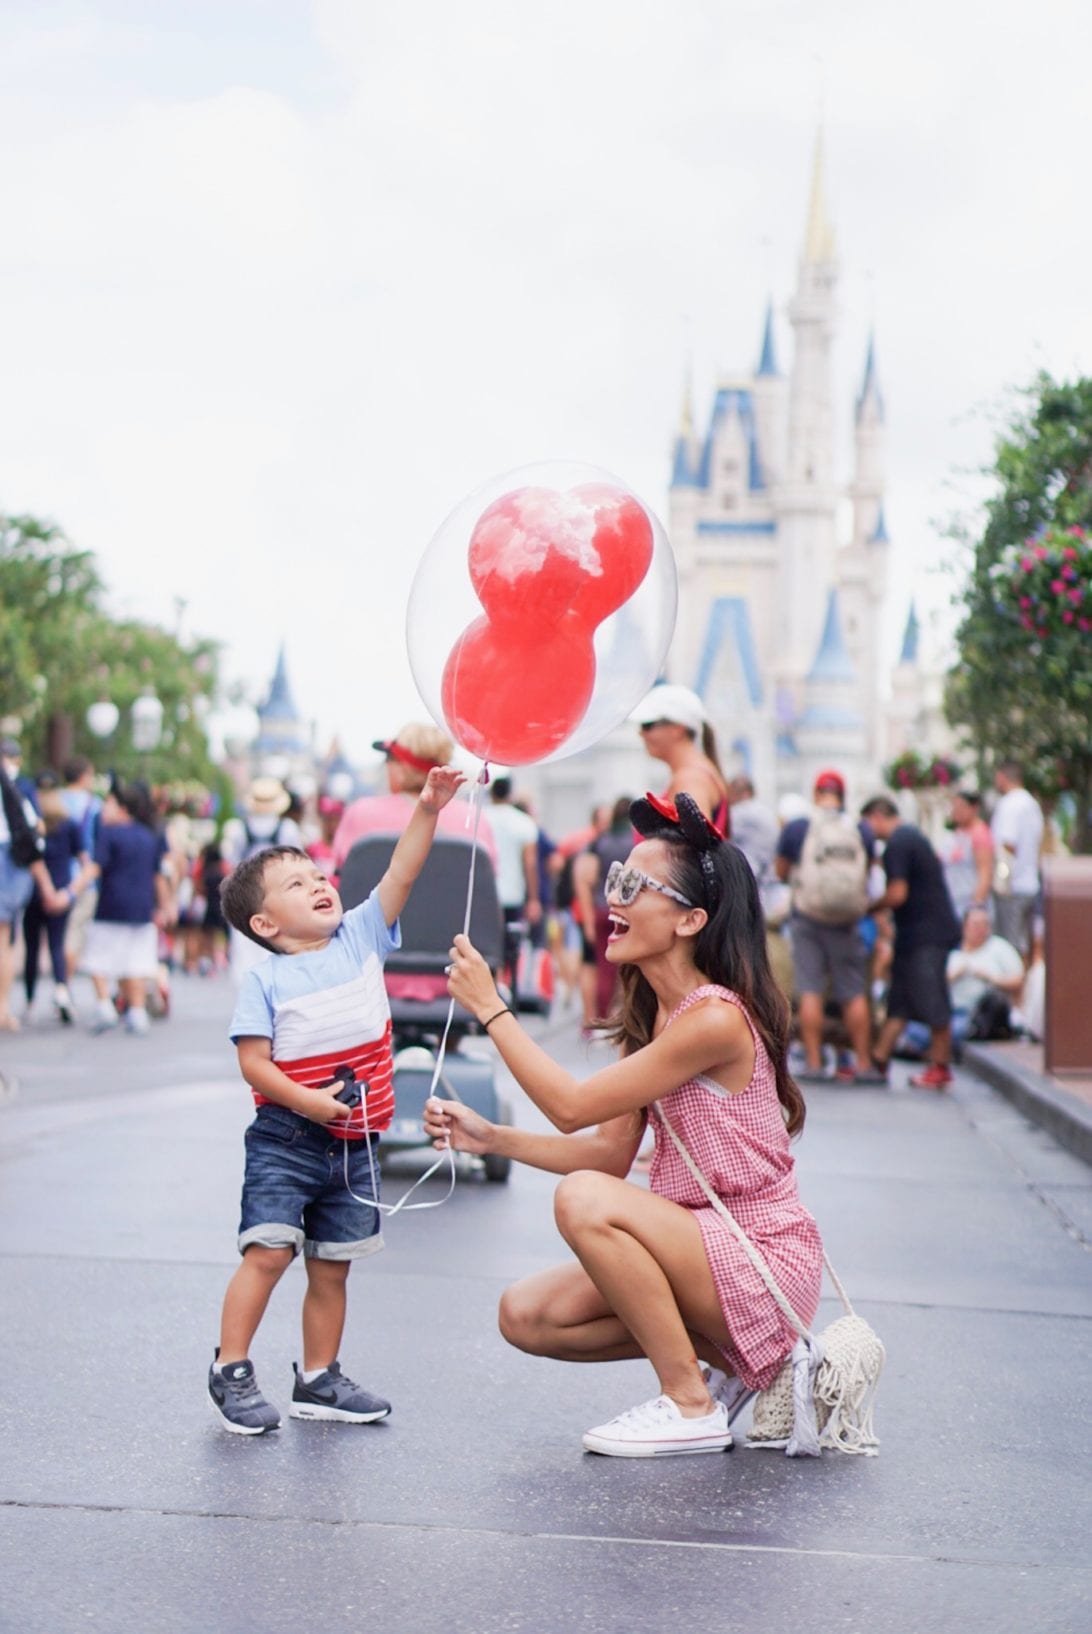 DISNEY WITH A TODDLER, TIPS FOR FAMILIES VISITING DISNEY, DISNEY WORLD, WHAT TO DO IN DISNEY WORLD, VISITING DISNEY WORLD, FIRST TIME IN DISNEY WORLD, VISITING DISNEY WORLD WITH A TODDLER, ENCHANTED KINGDOM, MICKEY BALLOON 